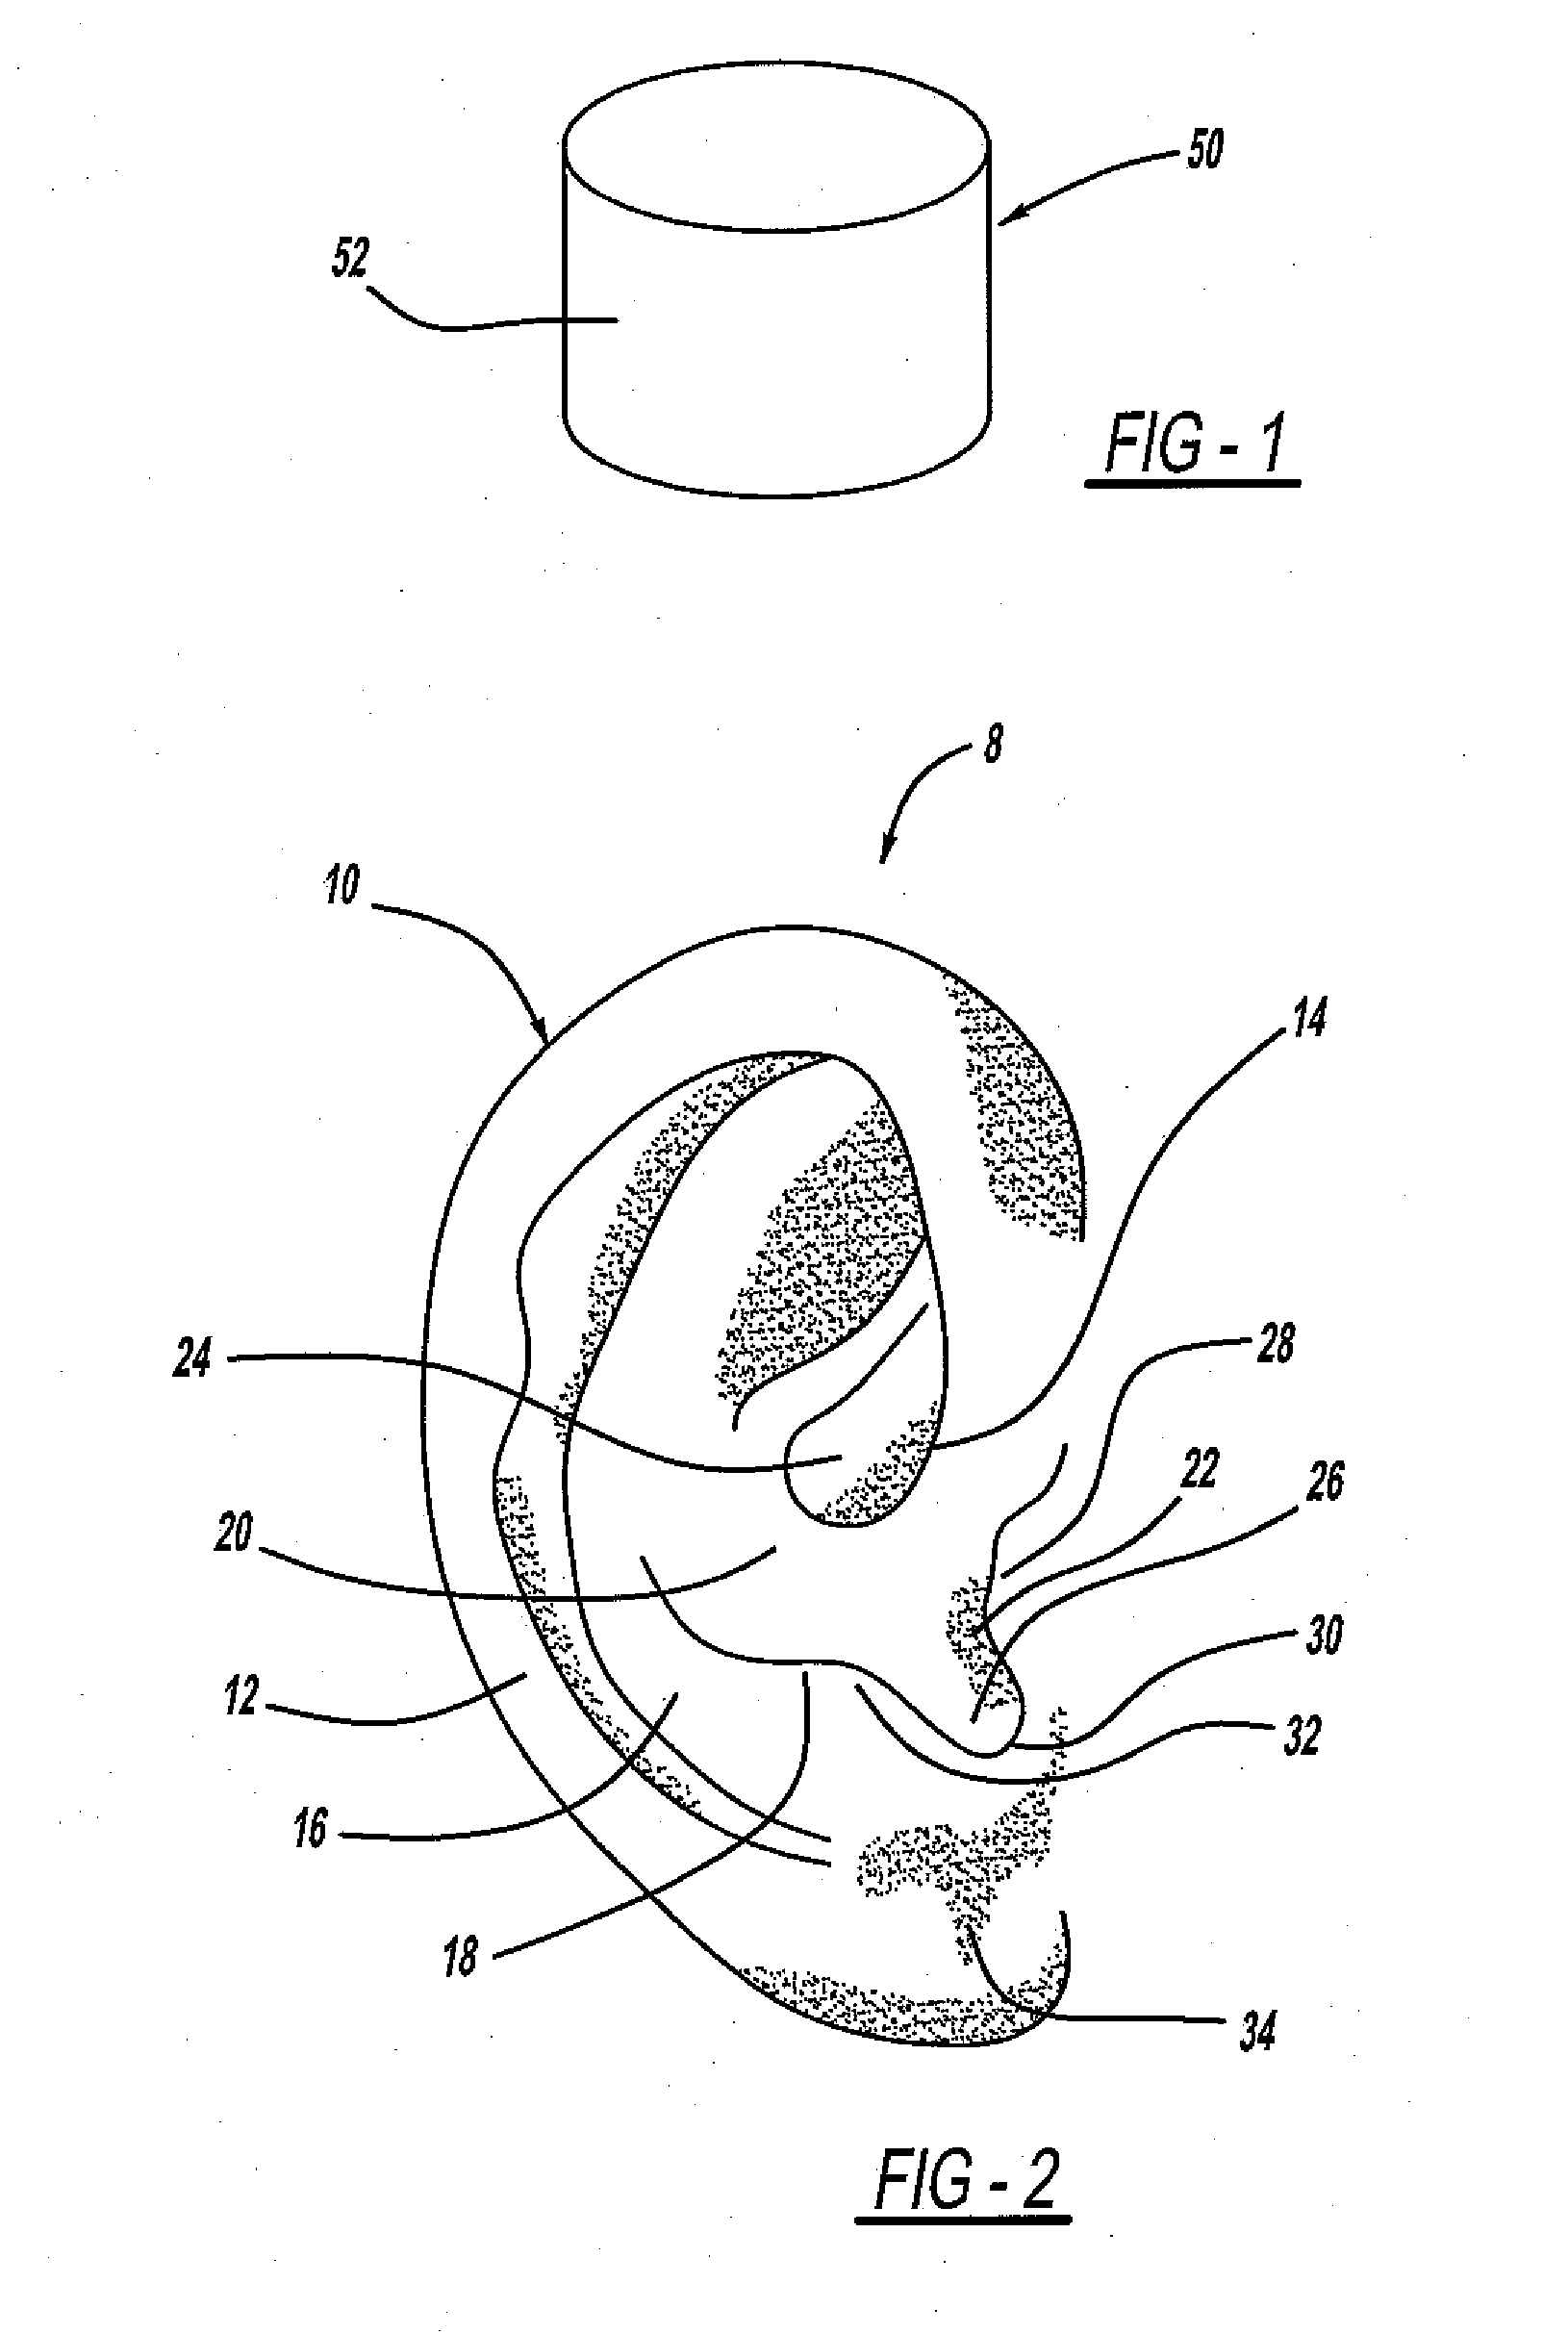 Apparatus and method of anchoring an ear piece